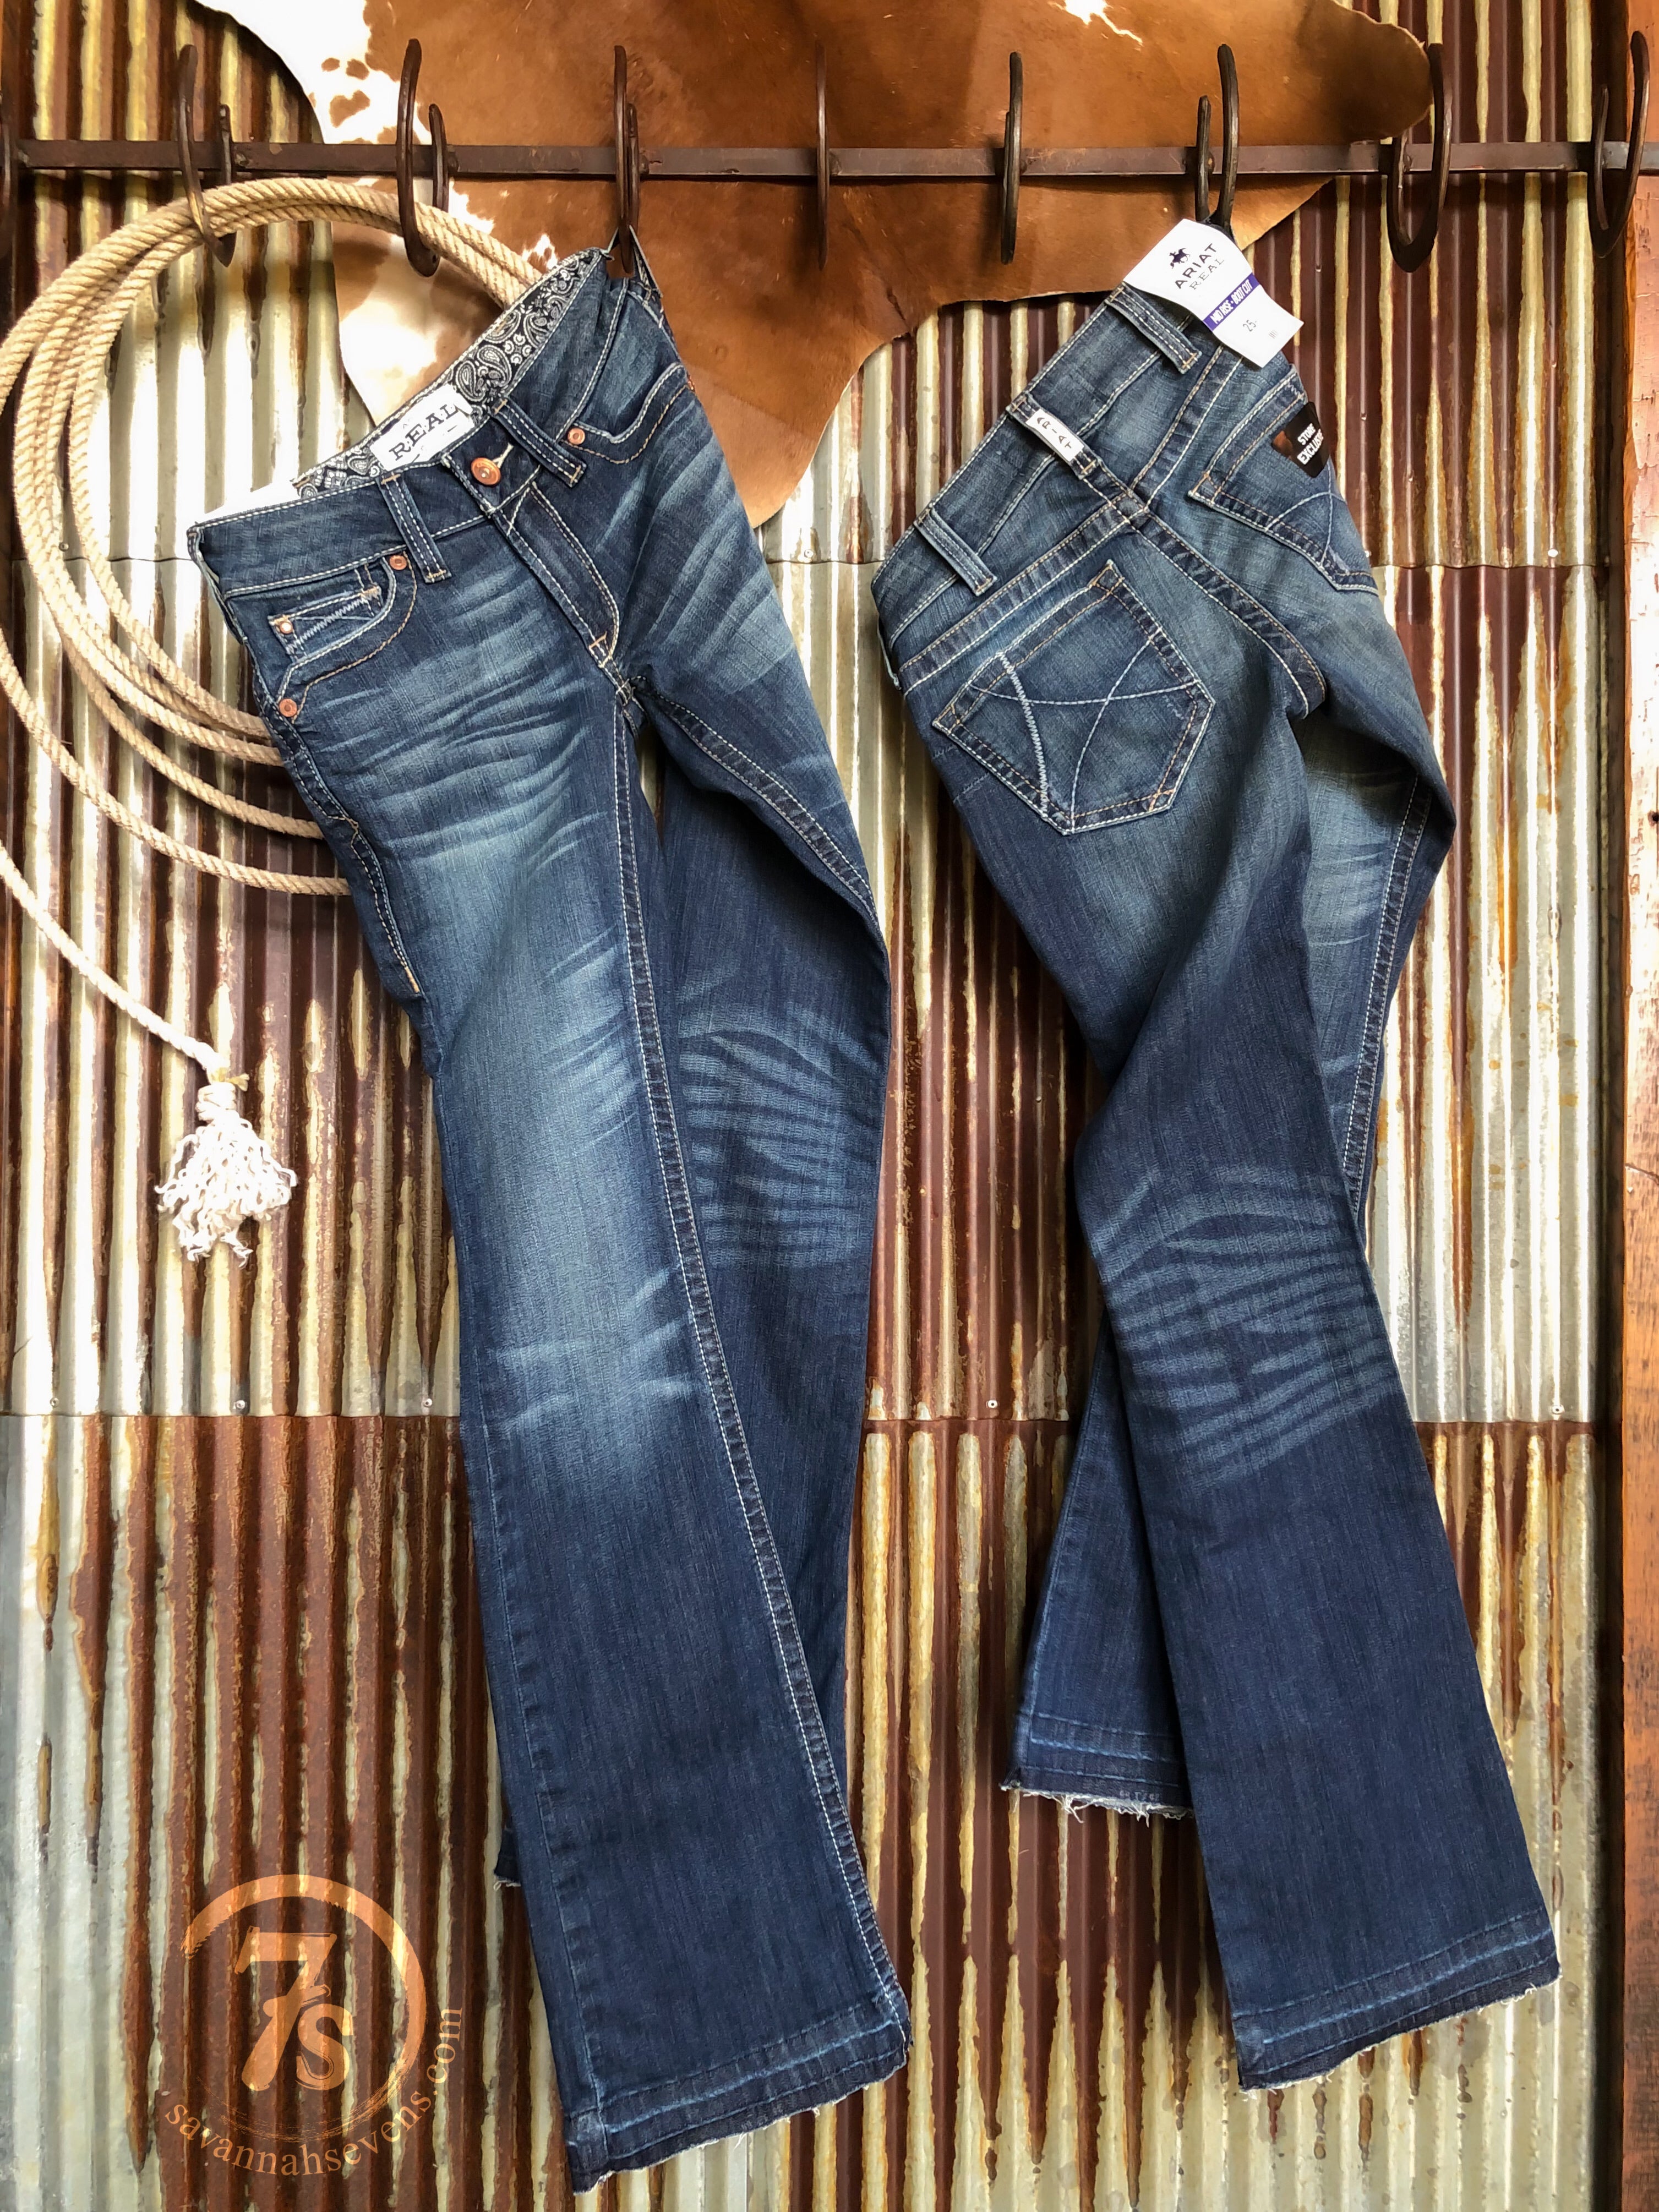 7s bootcut jeans mens